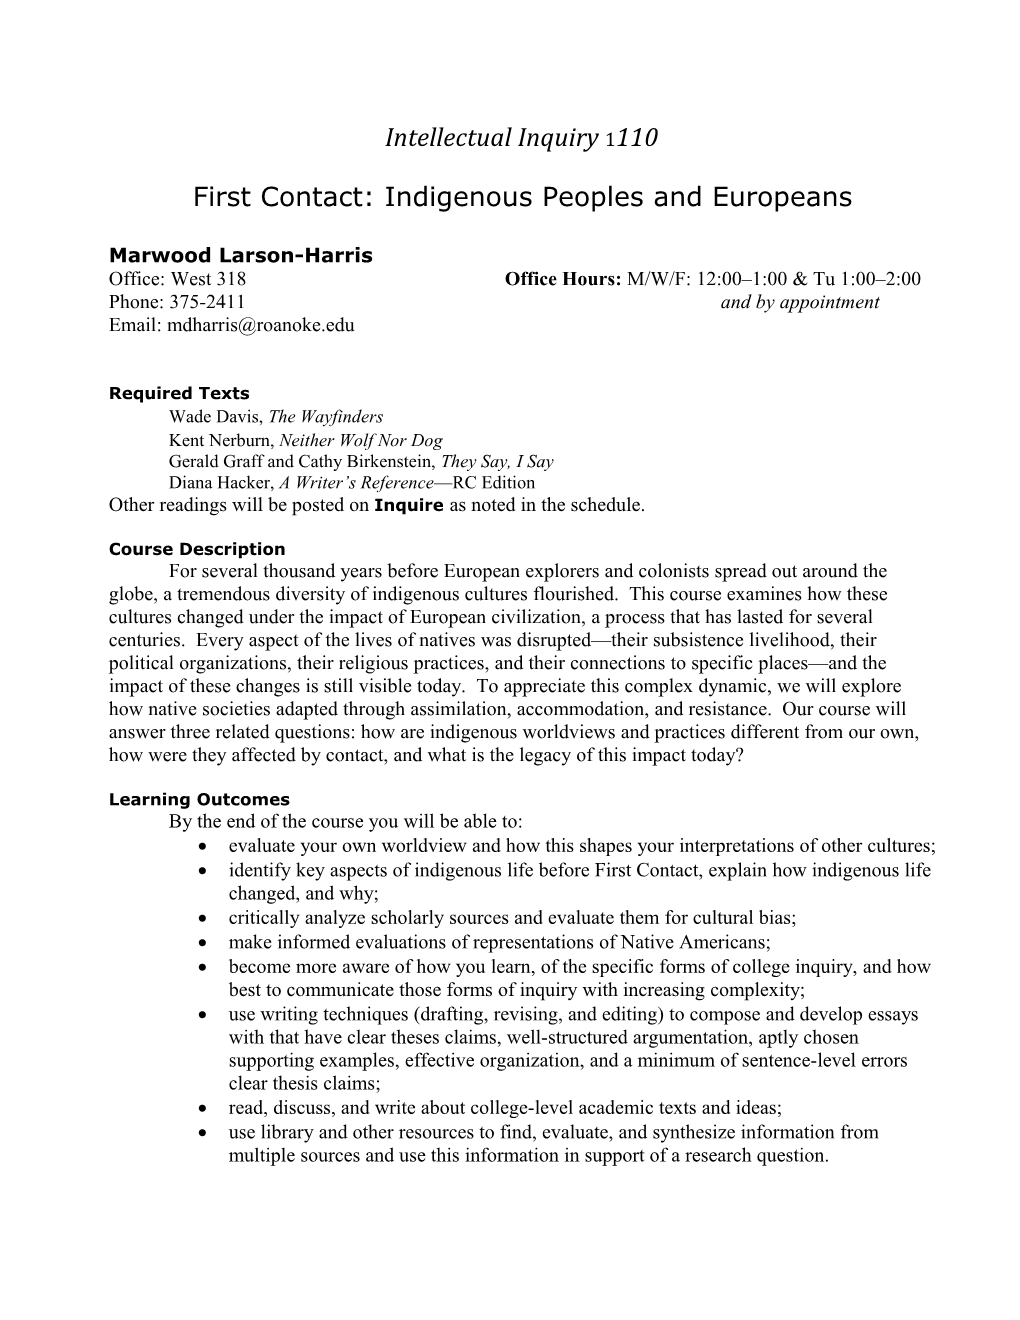 First Contact: Indigenous Peoples and Europeans